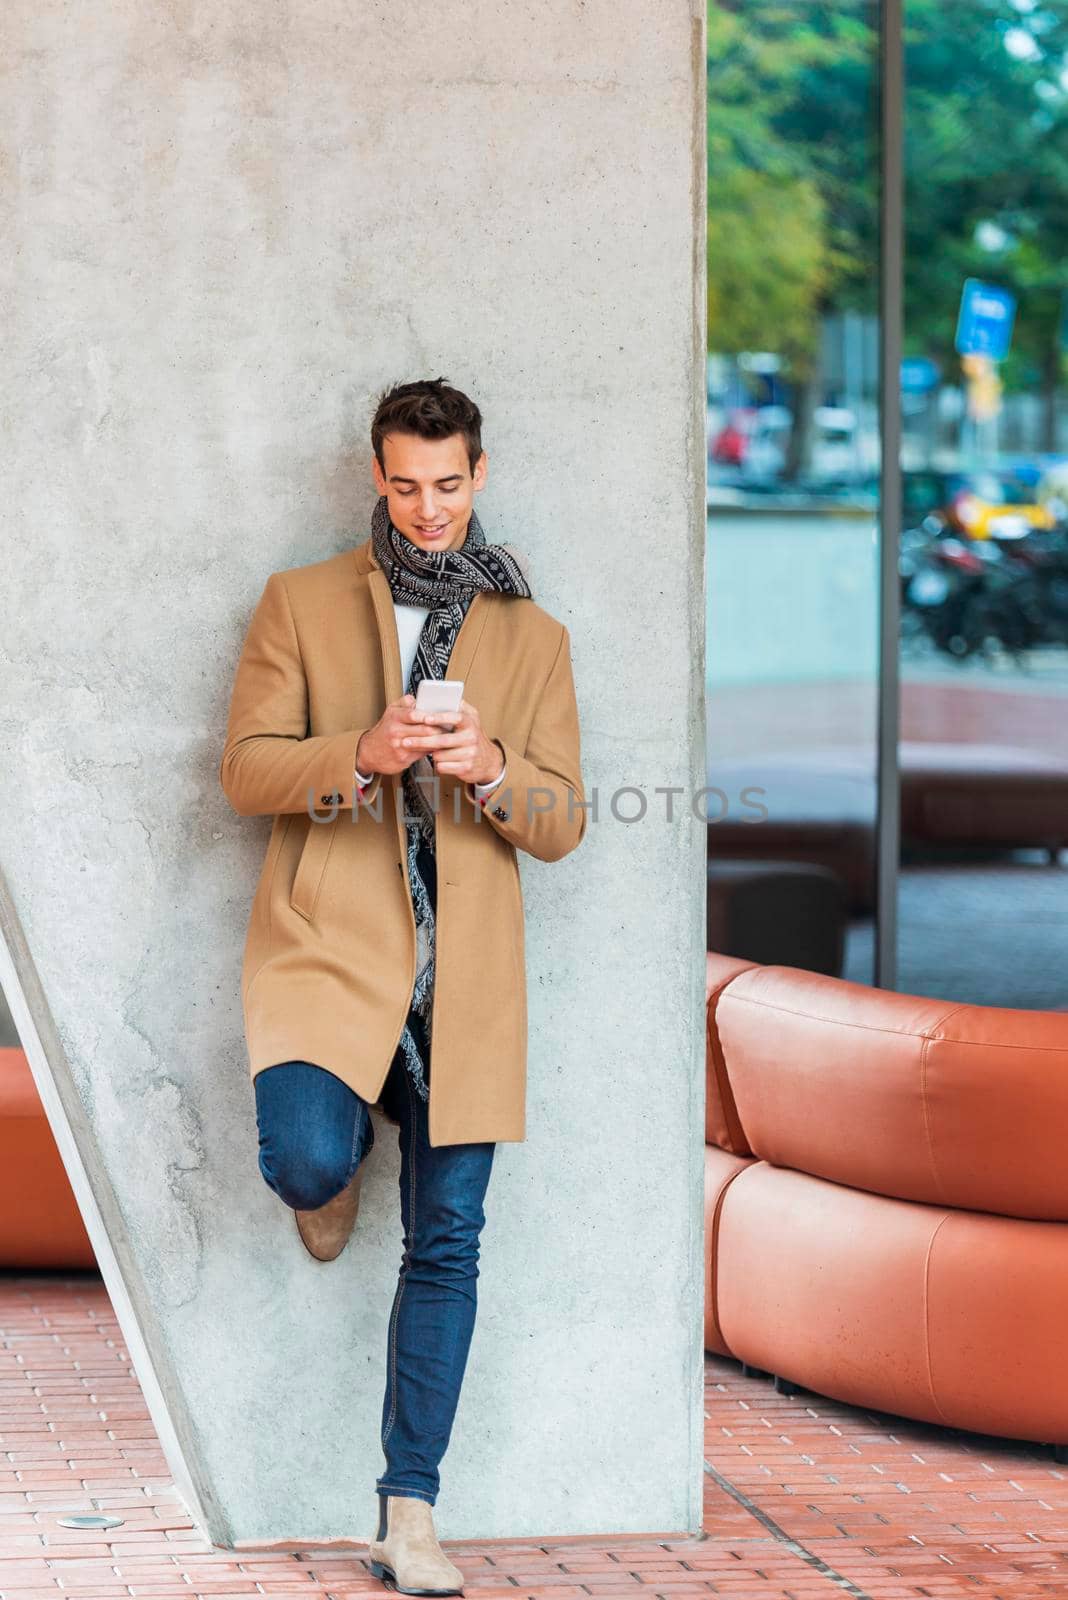 Businessman texting on mobile phone against wall by raferto1973